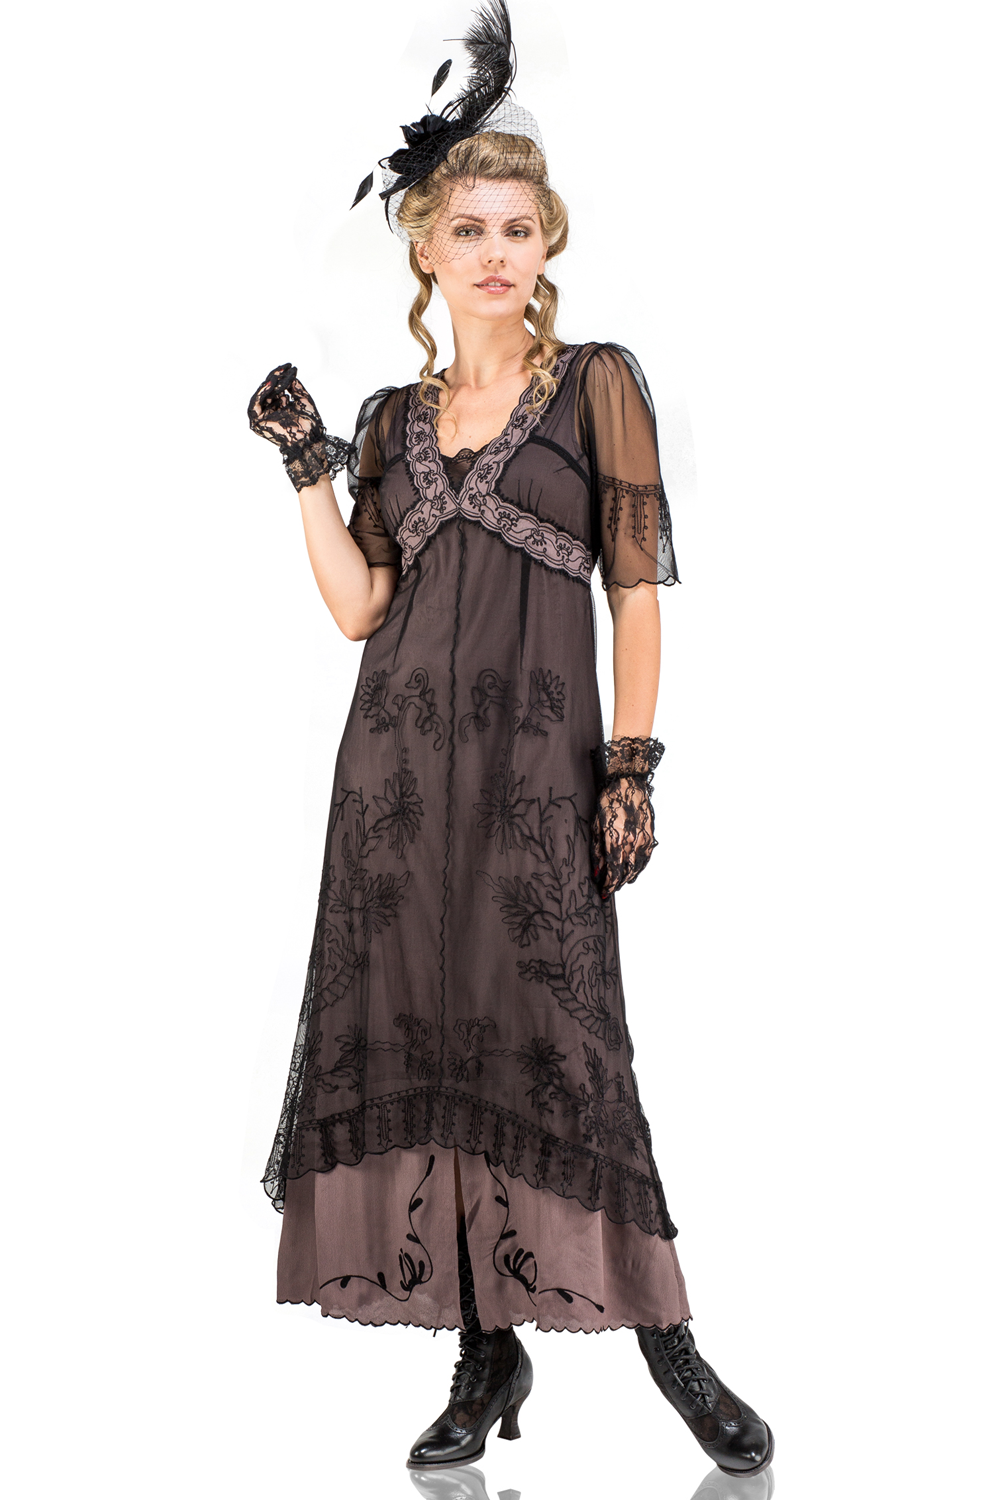 Downton Abbey Inspired Dresses New Vintage Titanic Tea Party Dress in Black-Coco by Nataya $249.00 AT vintagedancer.com